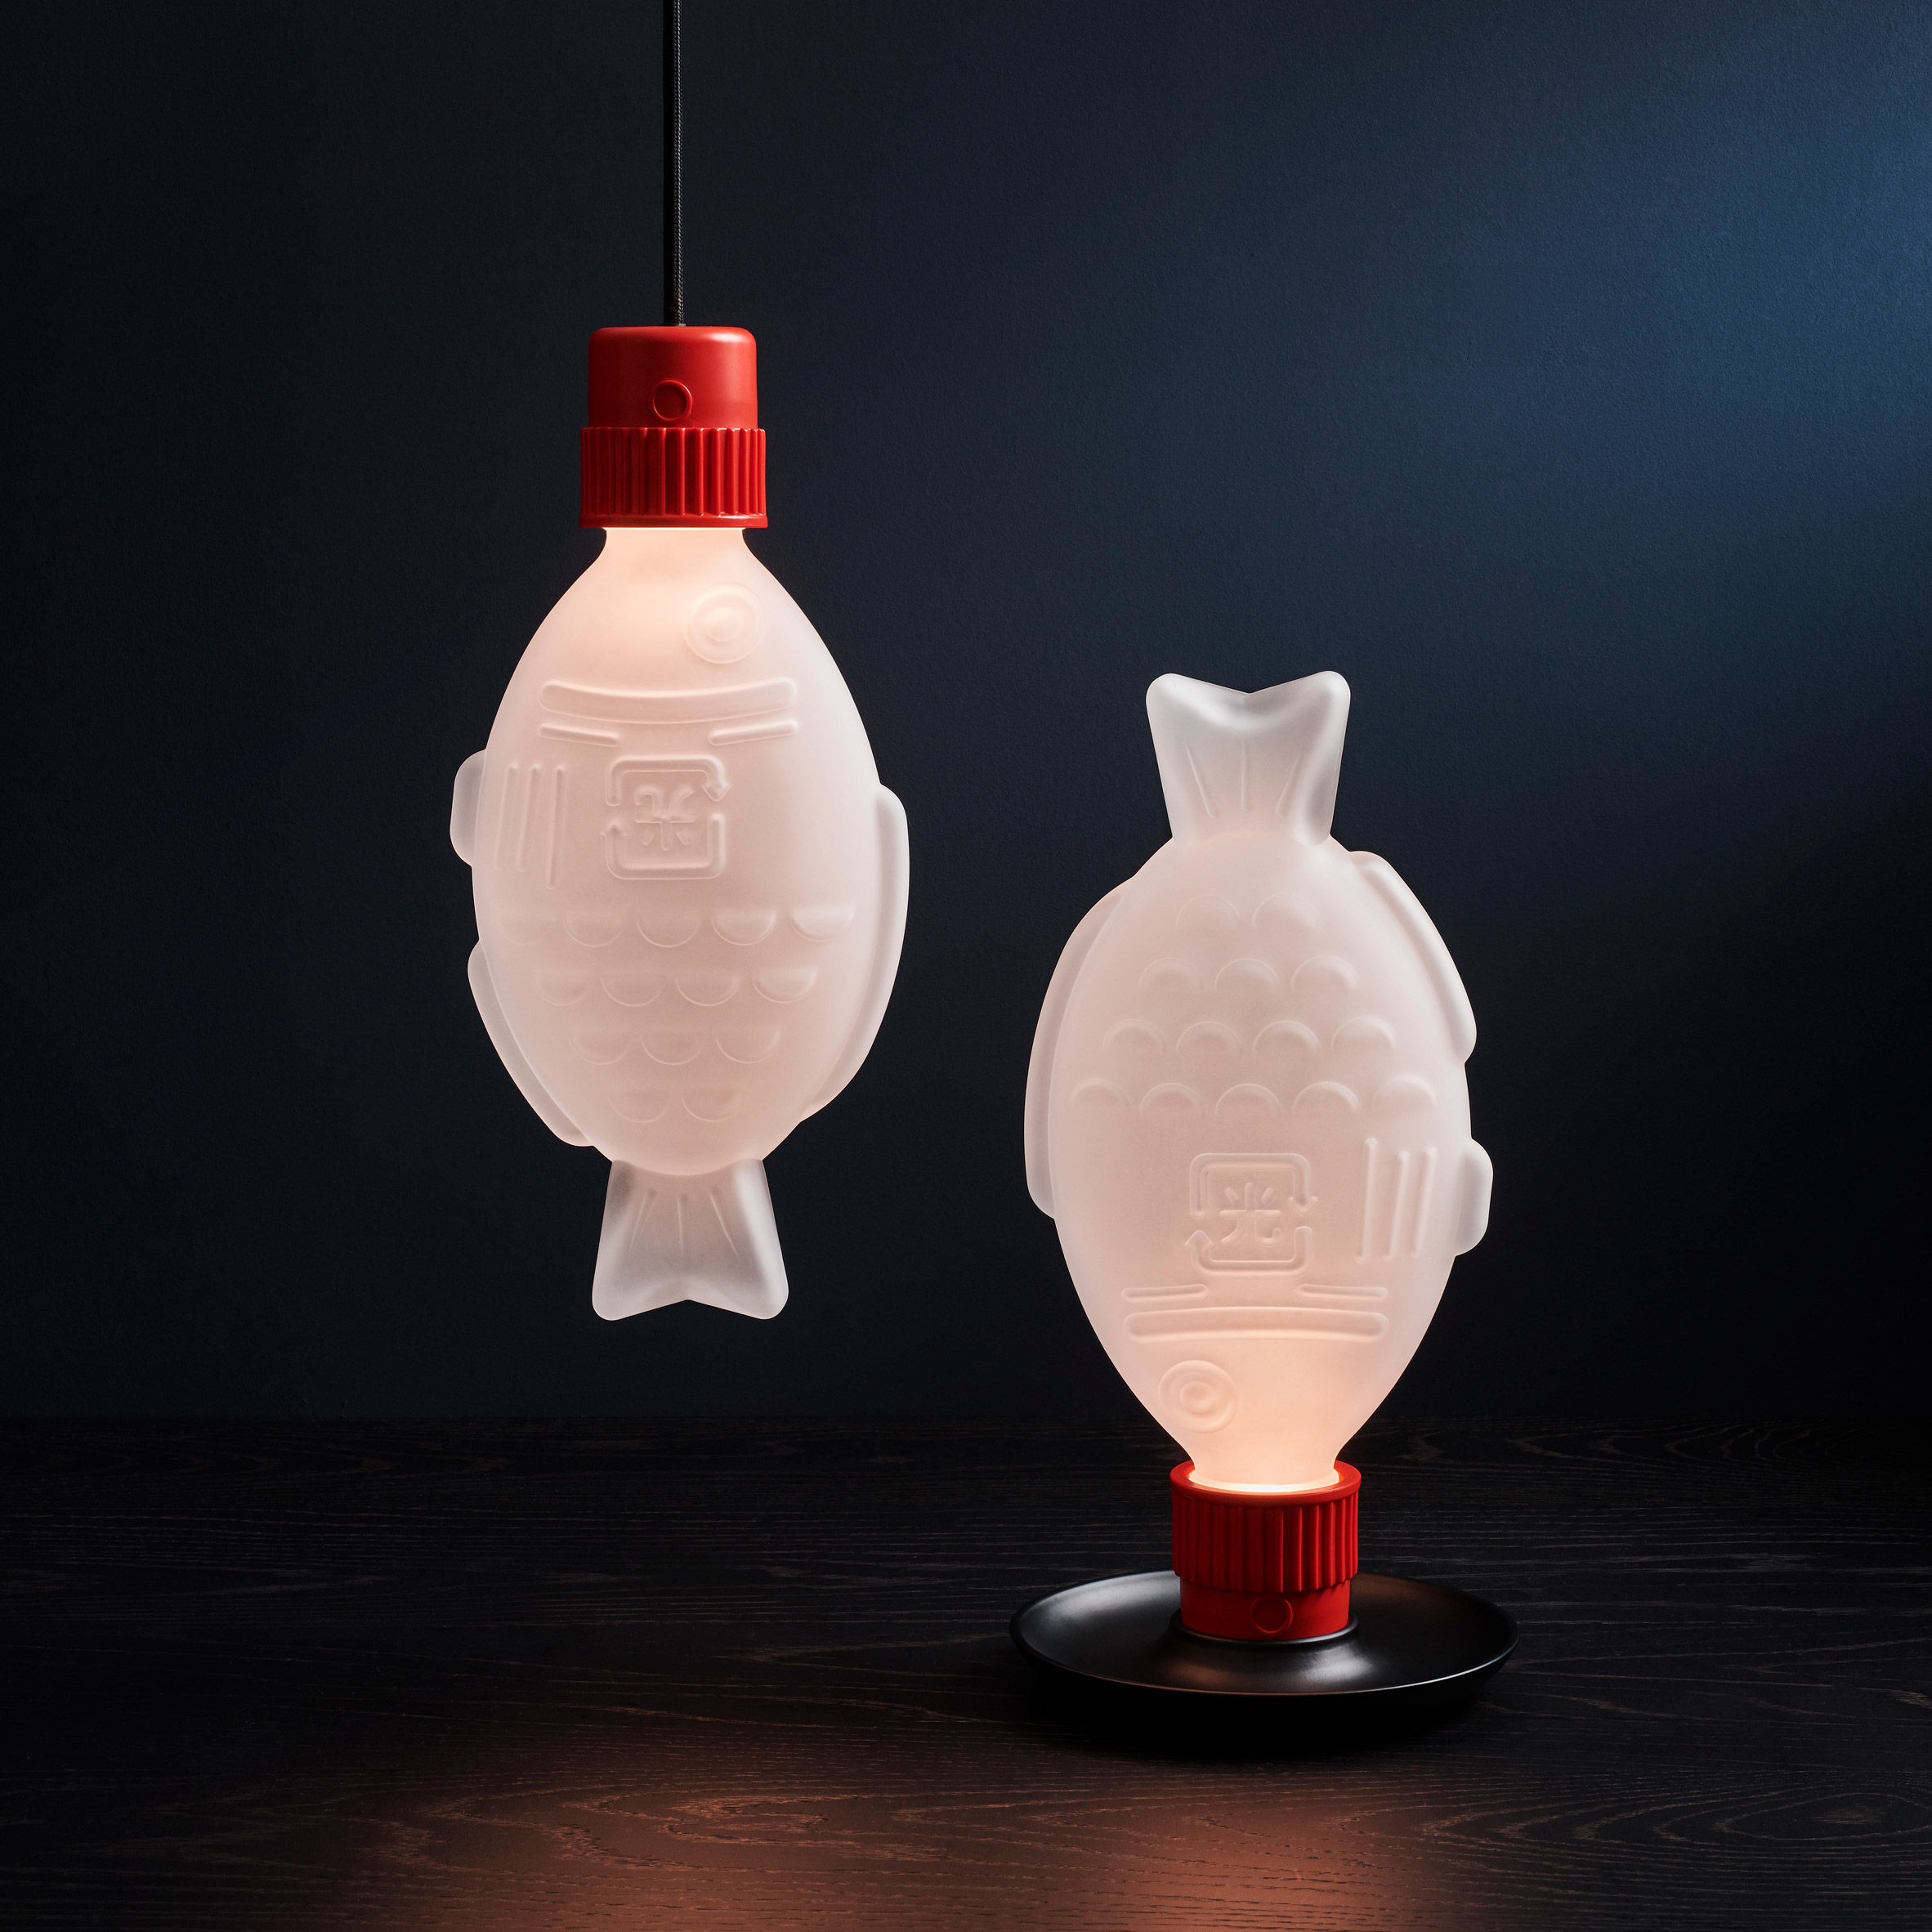 Lim inch Besætte Heliograf makes lamps in the shape of sushi soy sauce bottles